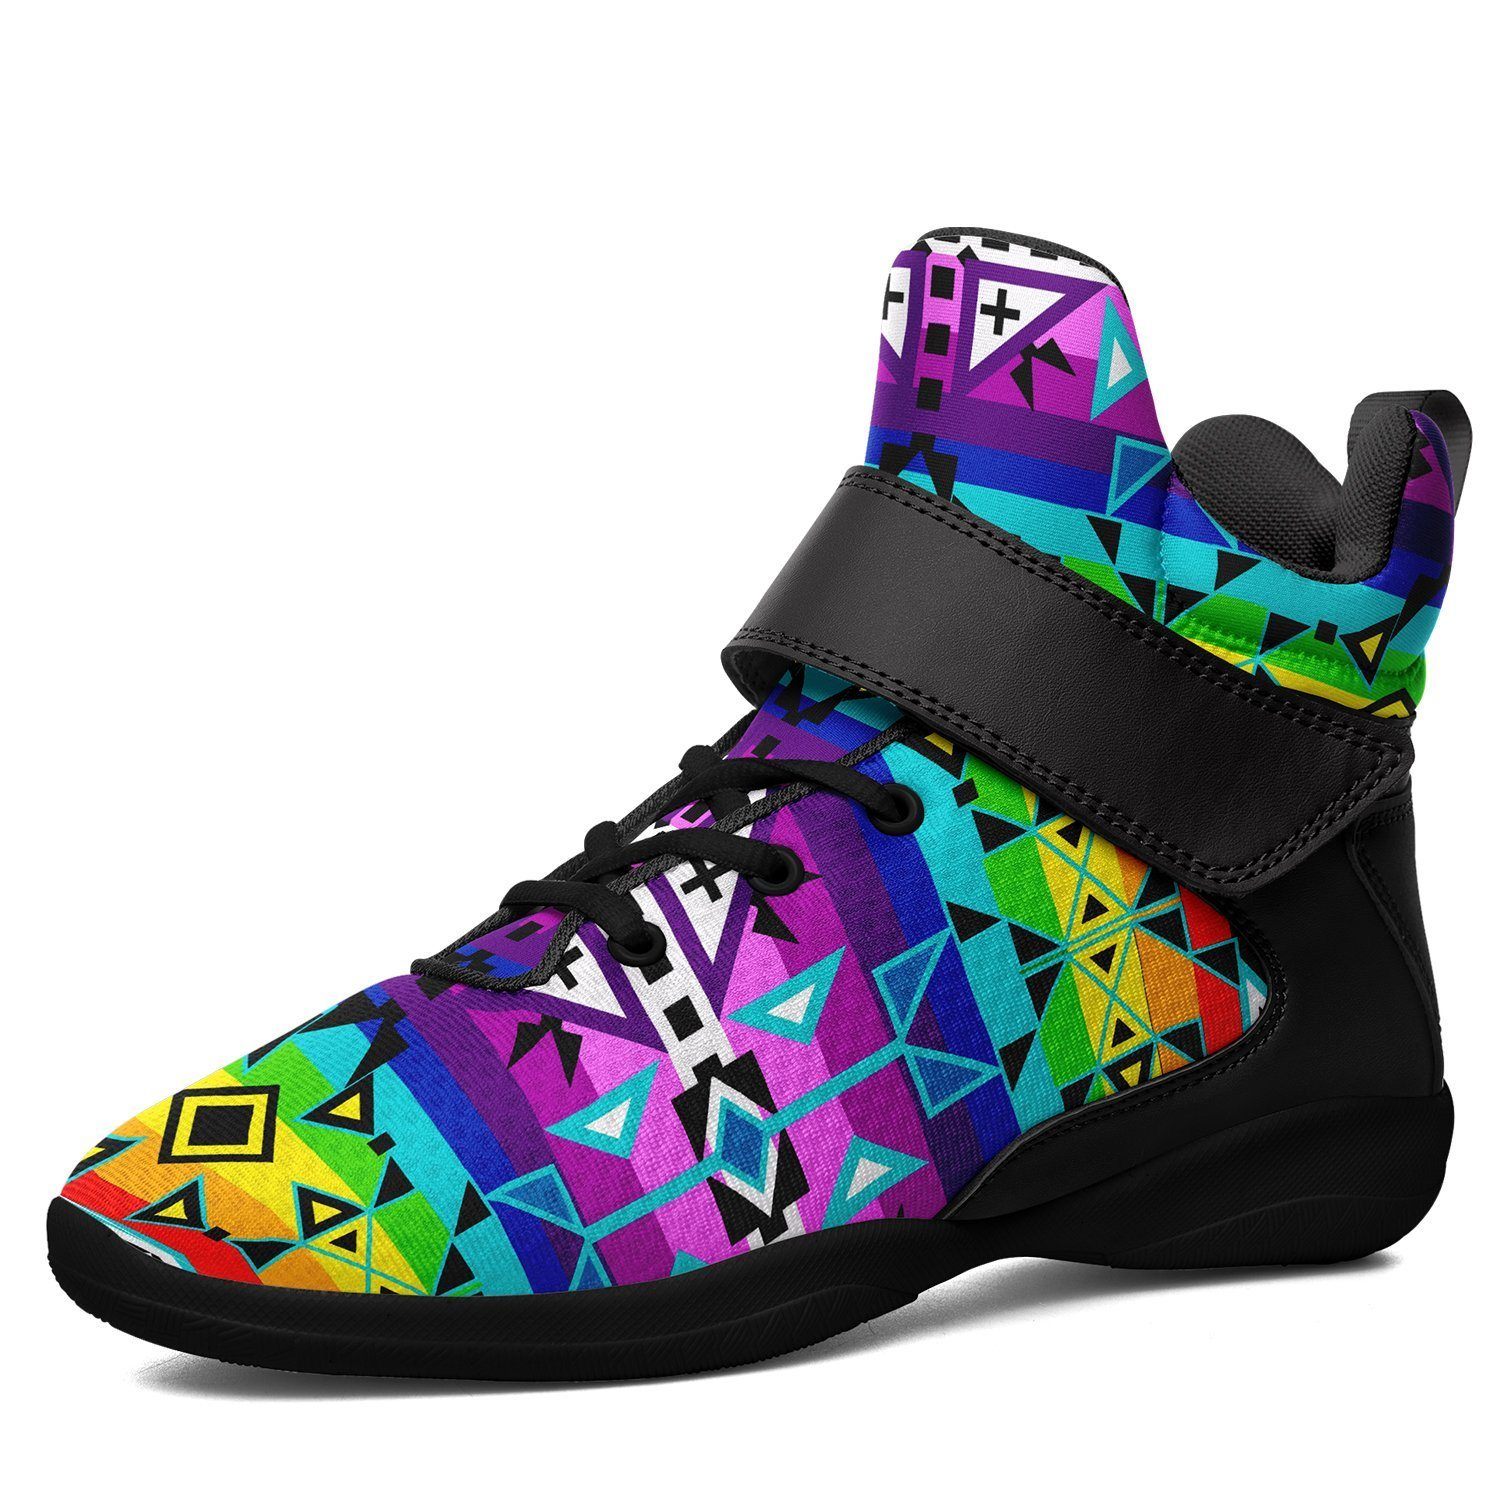 After the Rain Kid's Ipottaa Basketball / Sport High Top Shoes 49 Dzine US Child 12.5 / EUR 30 Black Sole with Black Strap 